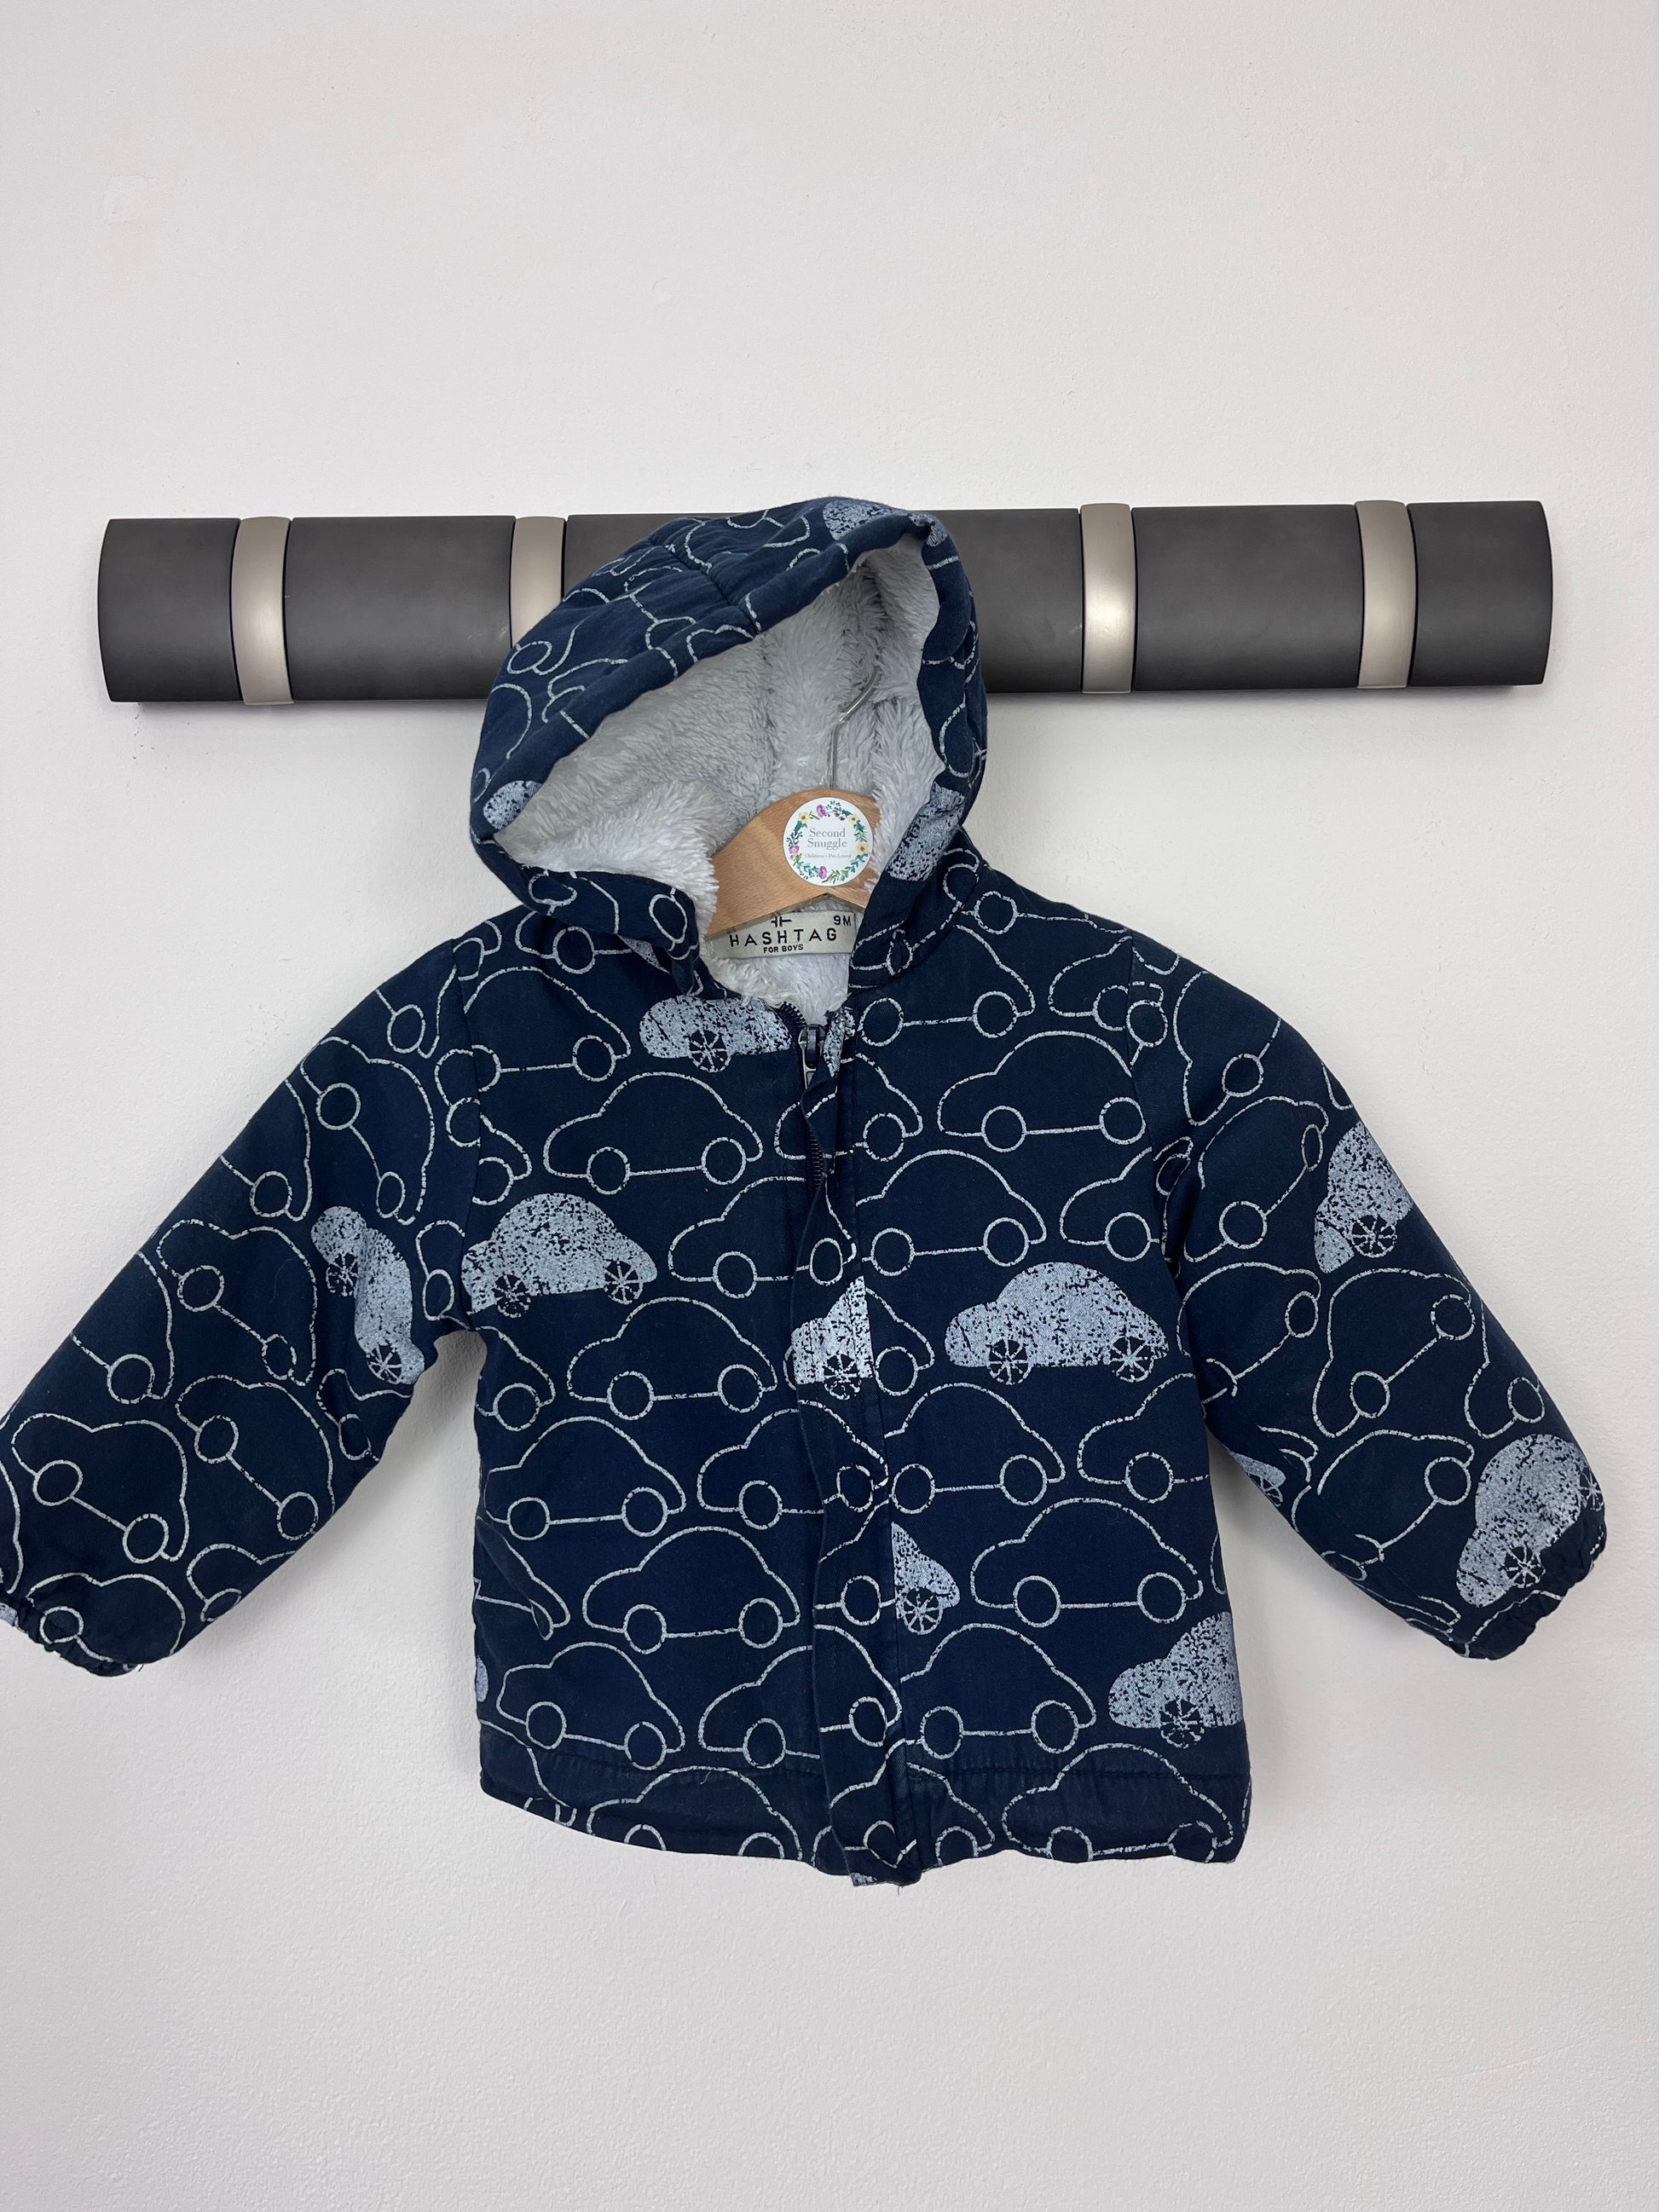 Hashtag 9 Months-Jackets-Second Snuggle Preloved